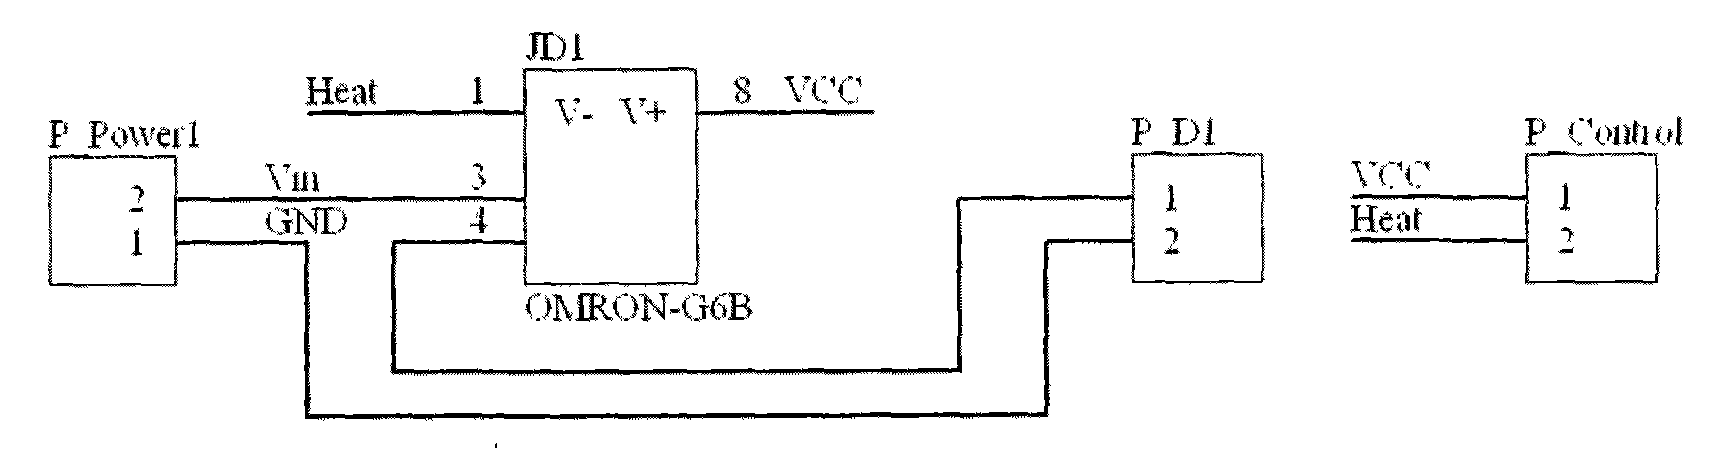 Deuterium lamp power control circuit used for atomic absorption spectrophotometer